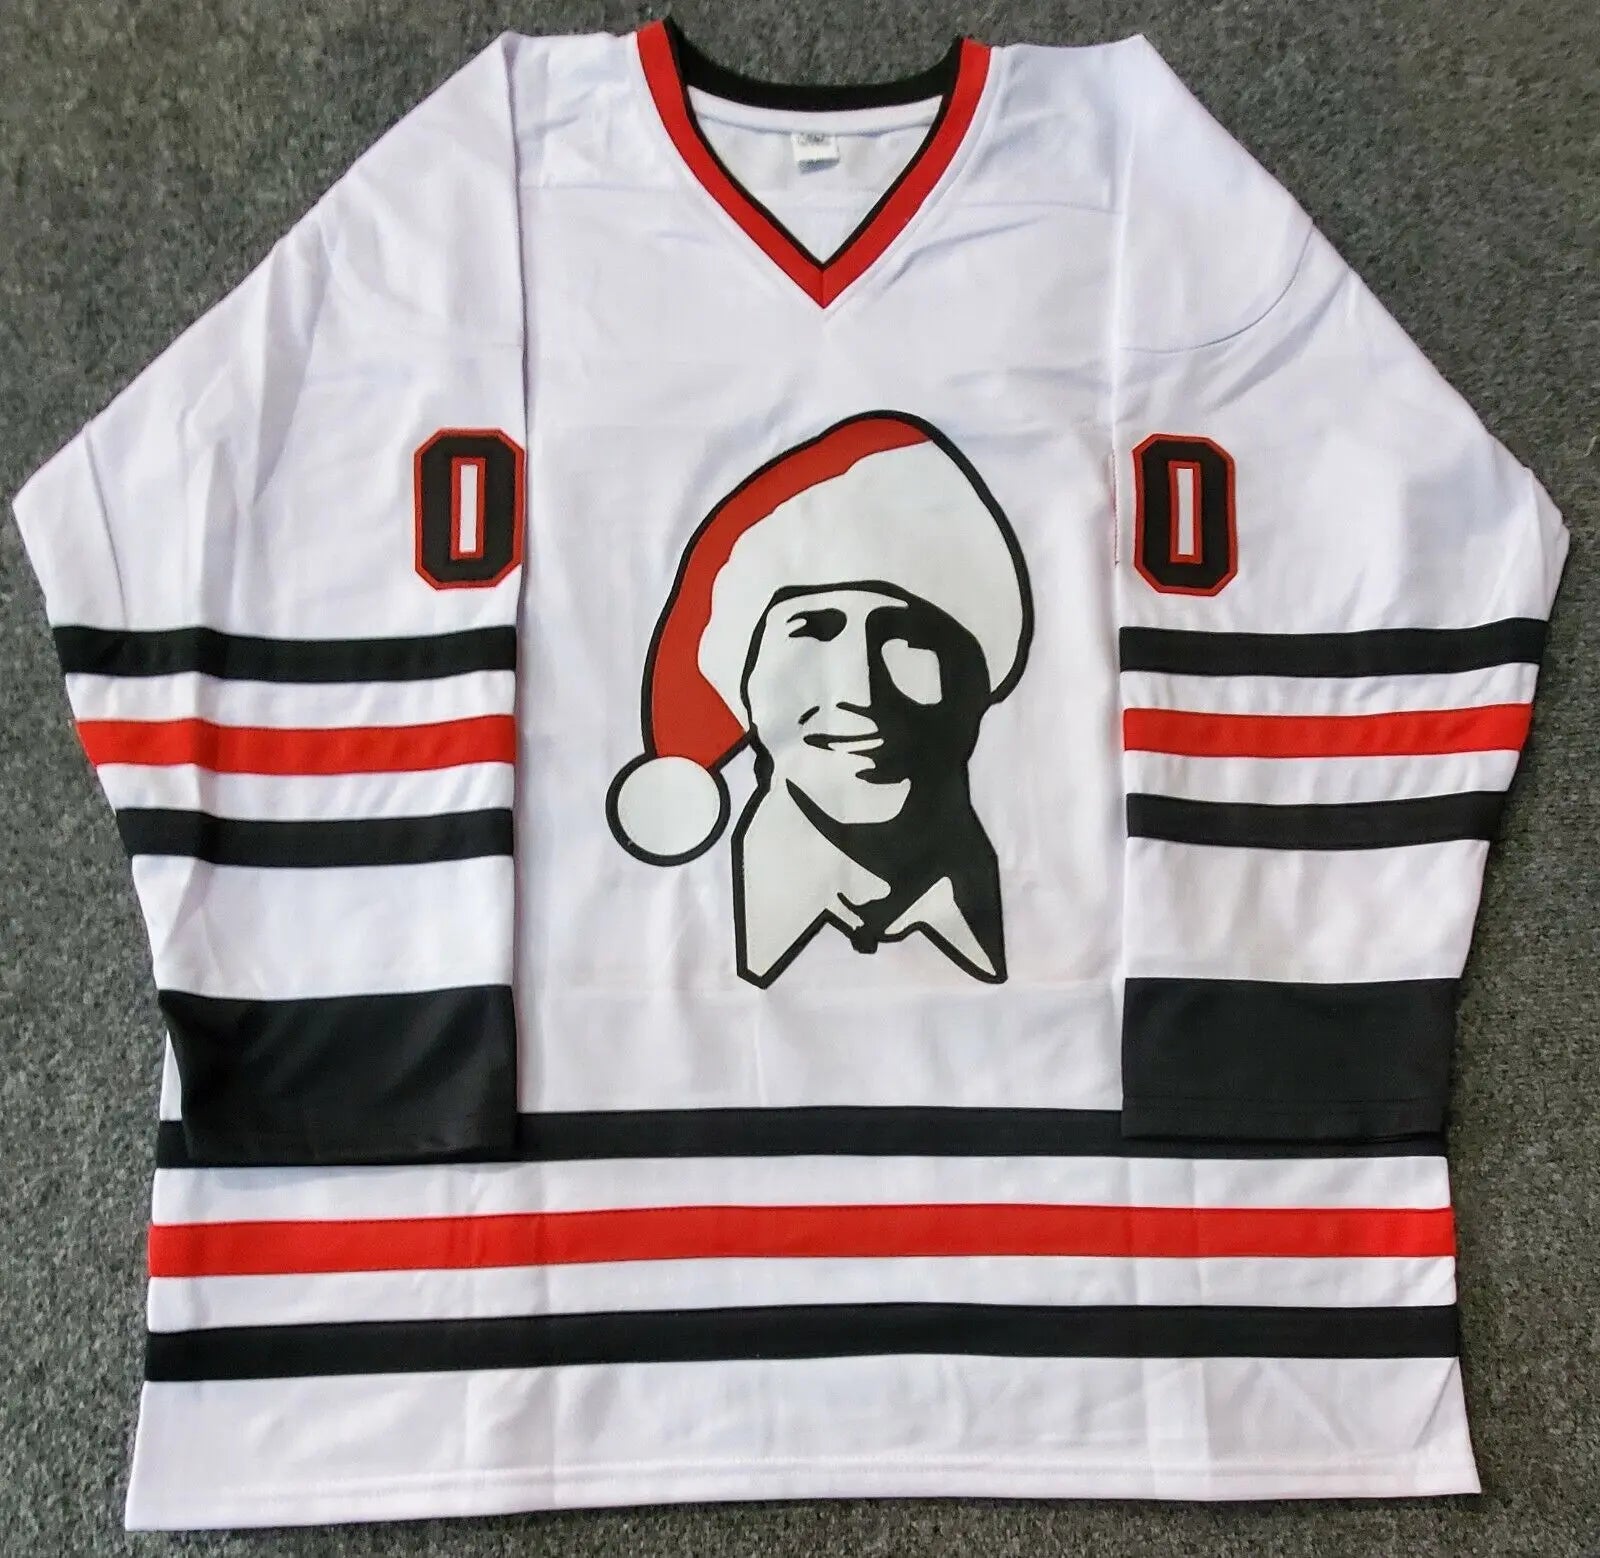 Chevy Chase Signed Framed Jersey Beckett Griswold Christmas Vacation